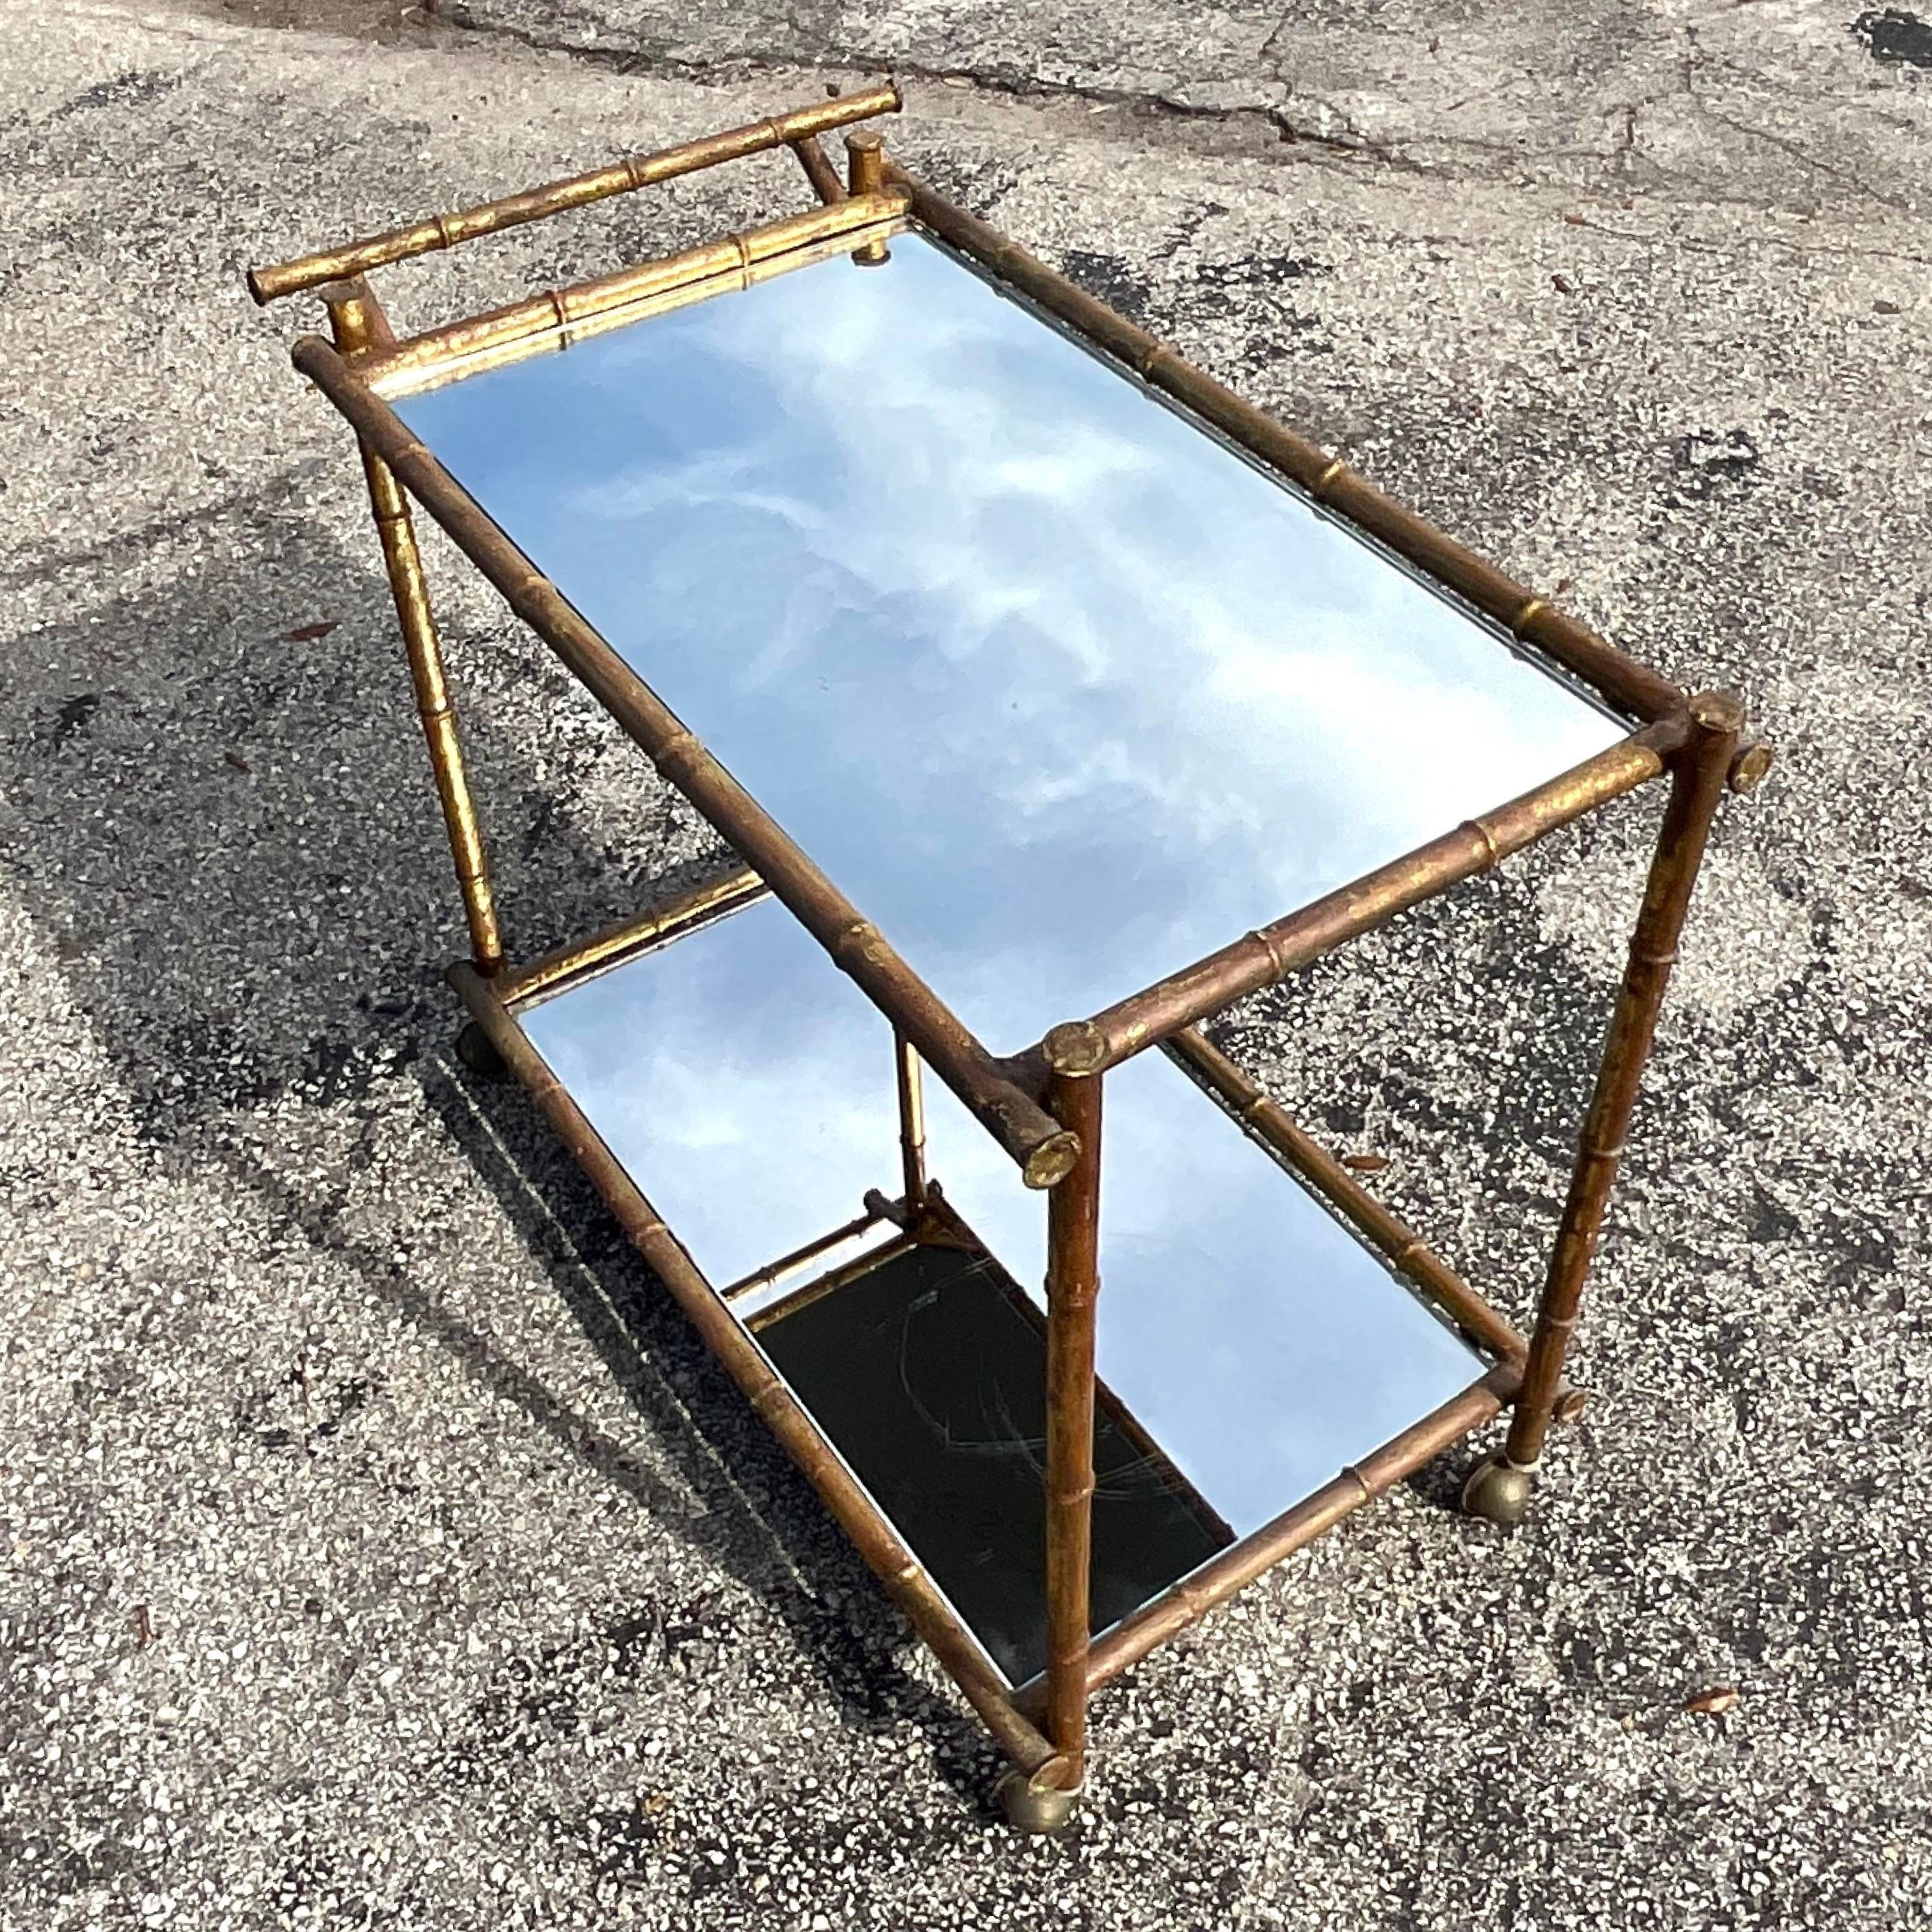 A stunning vintage Coastal bar cart. A chic metal bamboo frame with a patinated gilt finish. Inset mirrored shelves. Acquired from a Palm Beach estate.